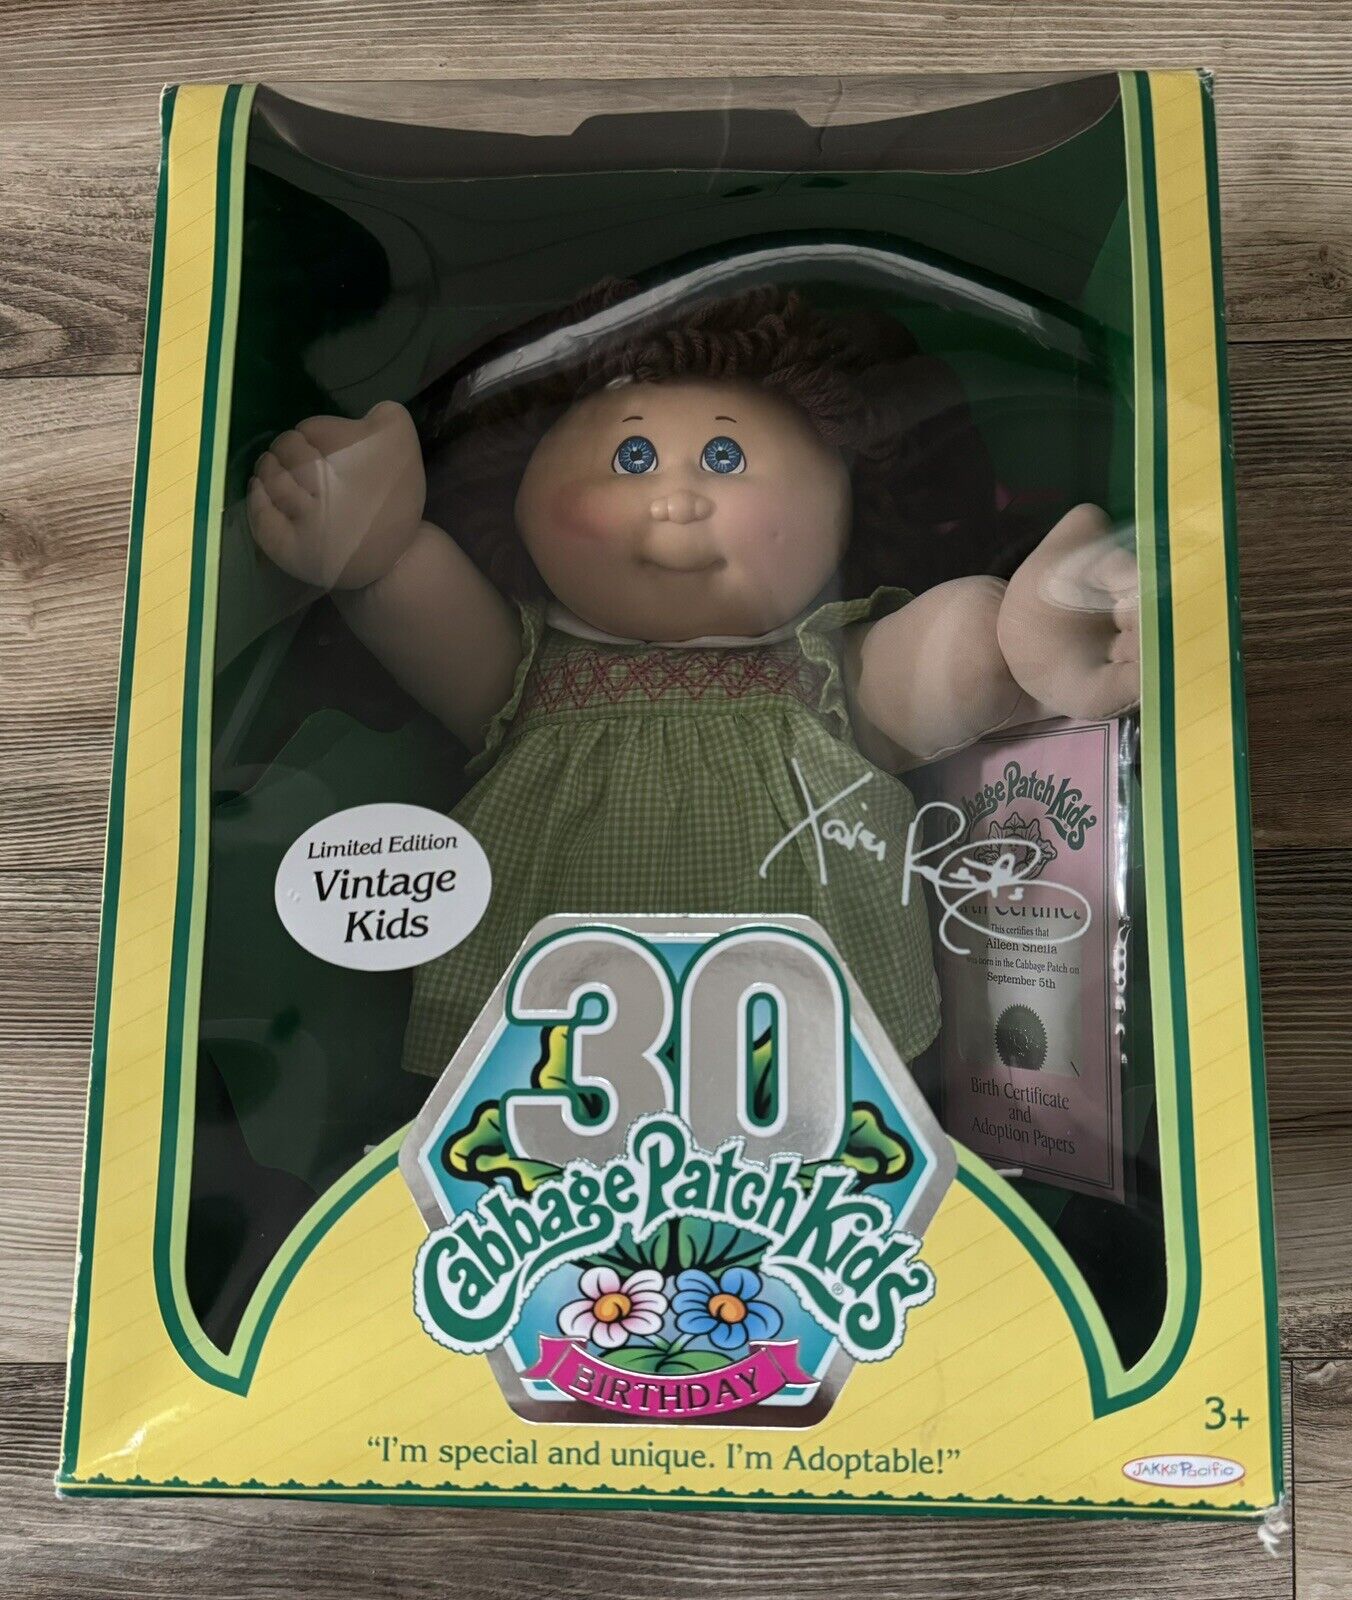 Cabbage Patch Kids 30 Anniversary Limited Edition Vintage Kids Brown Hair - NEW